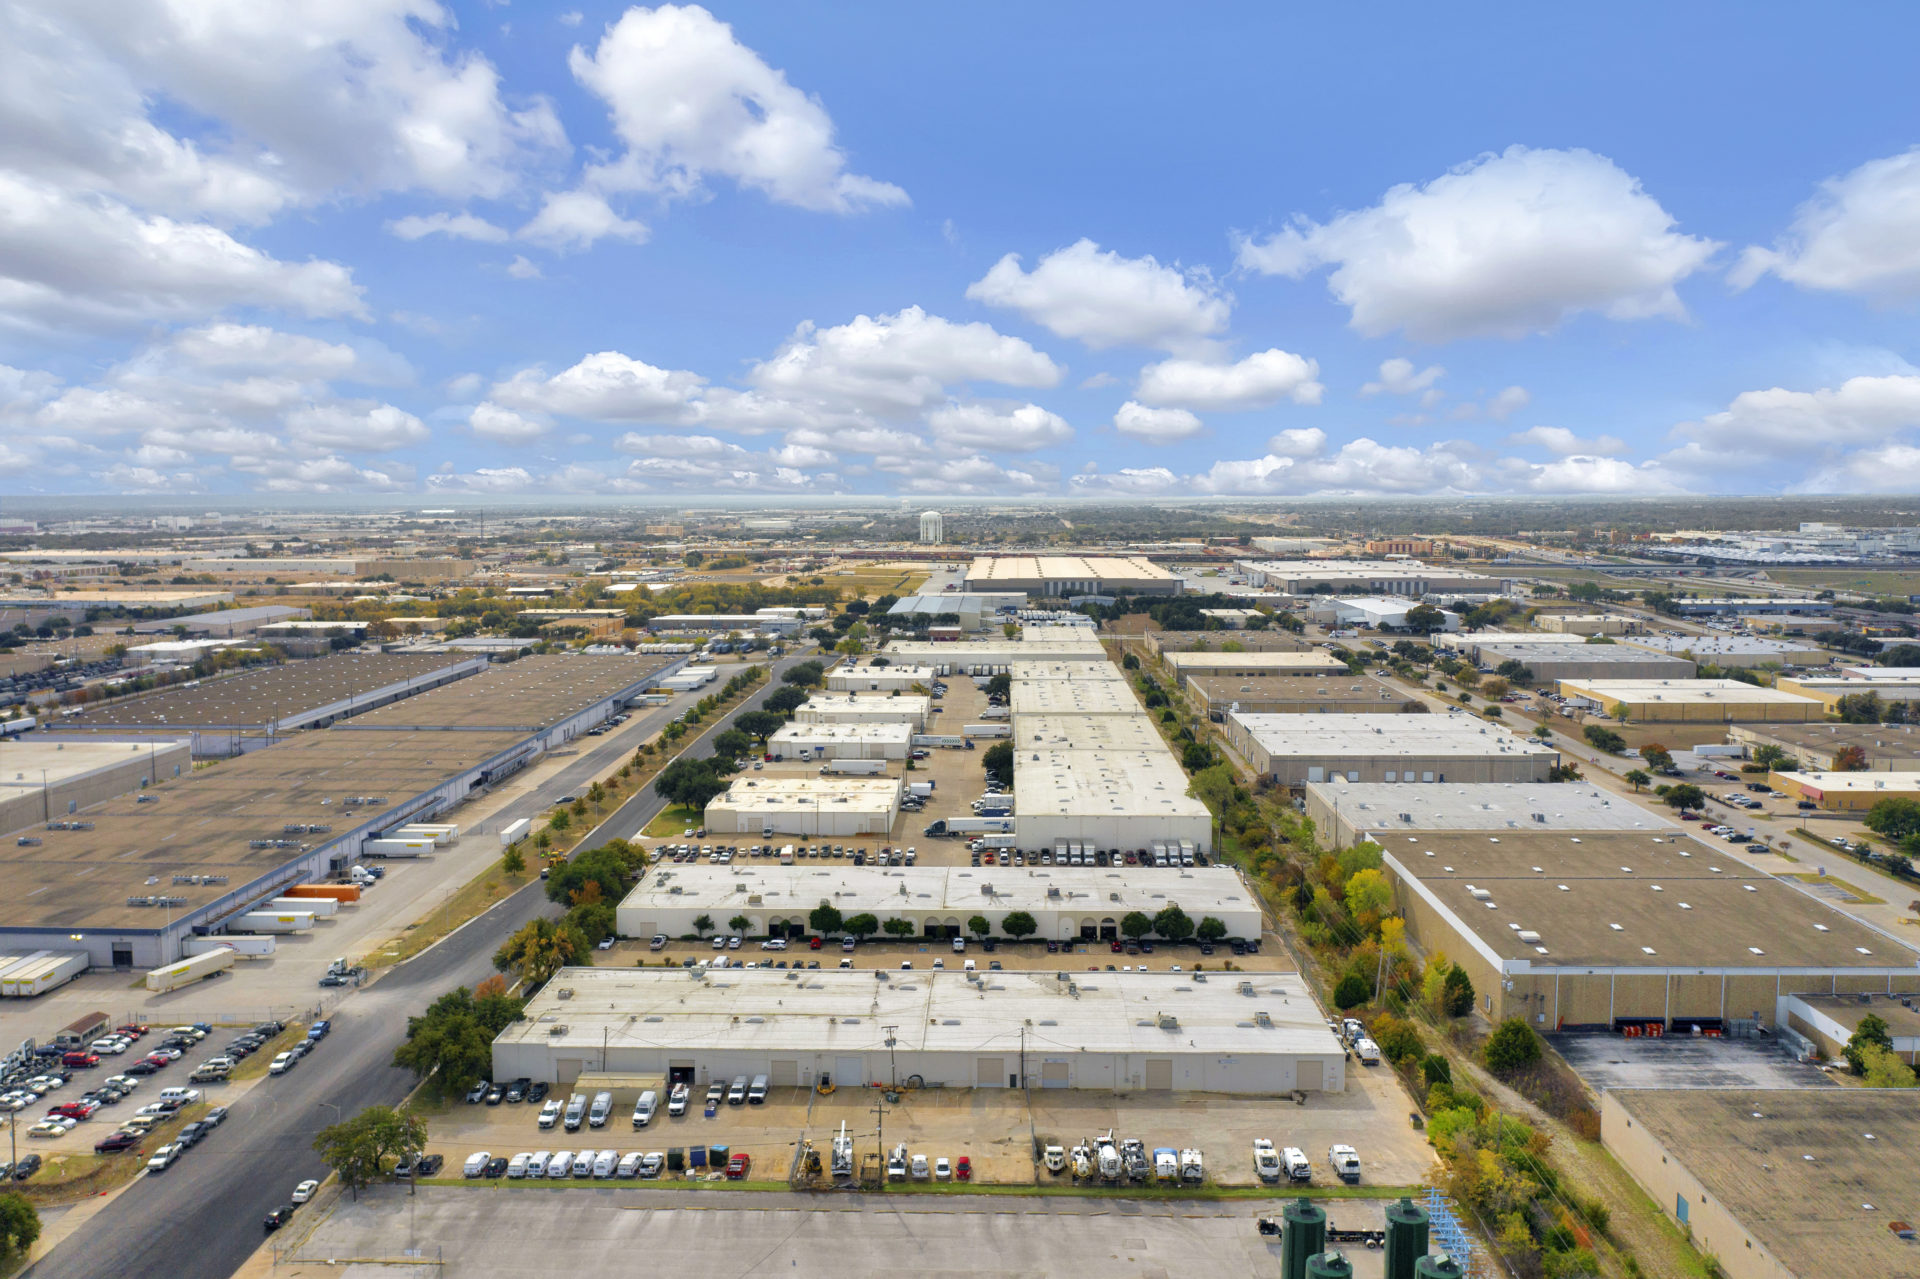 Birds eye view of the Arlington Industrial Portfolio of multiple white warehouse buildings on a contiguous plot of land